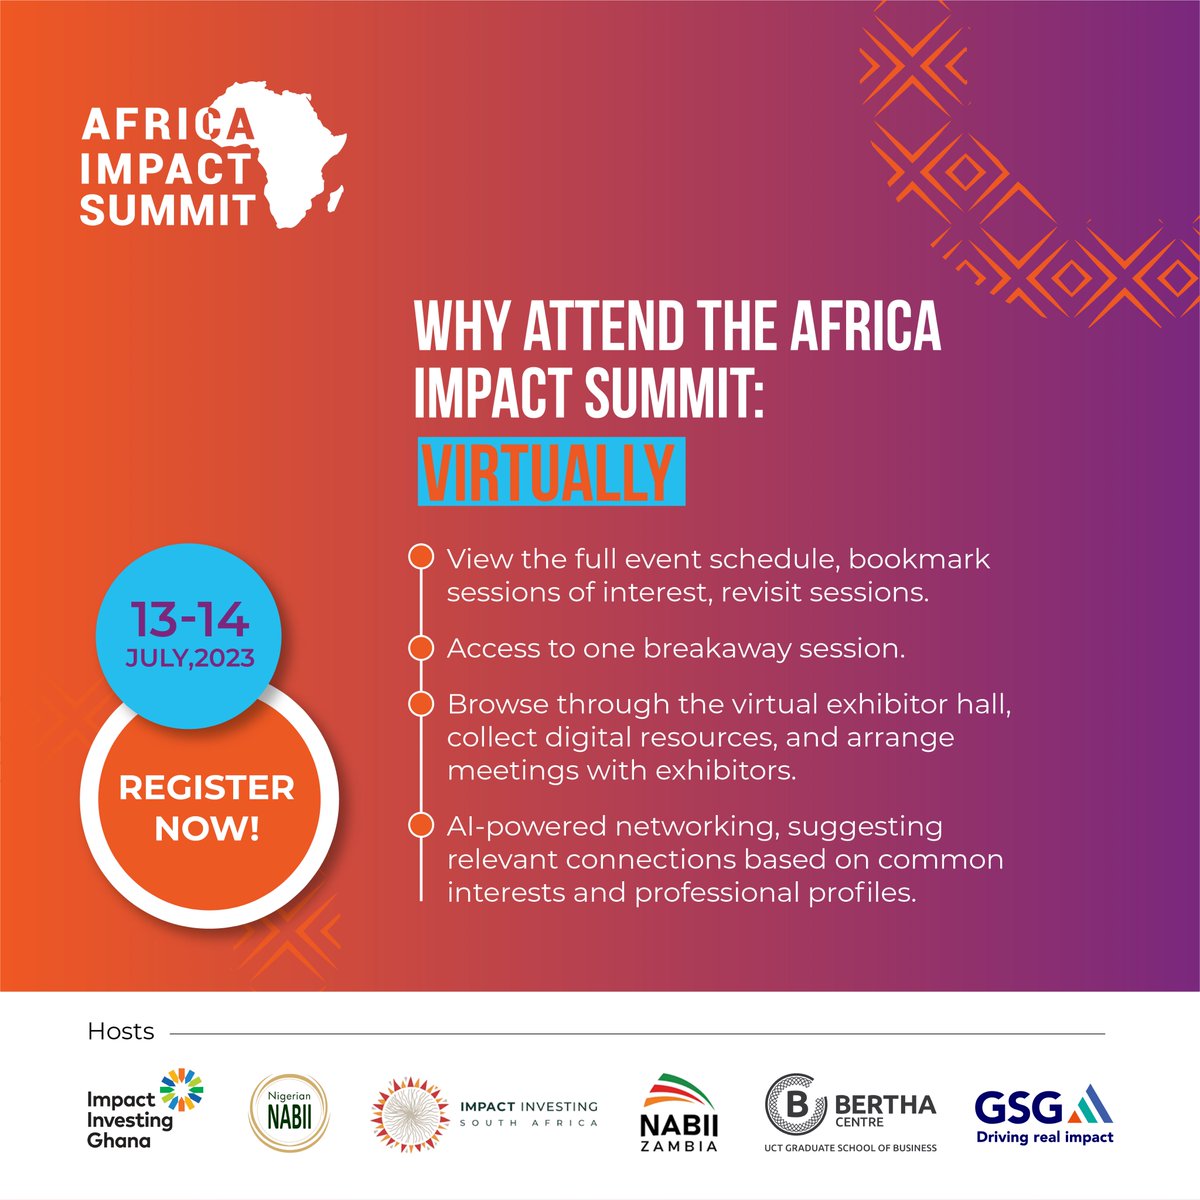 Douglas Knowledge Partners will be attending the inaugural Africa Impact Summit! Join us in-person or virtually on 13-14 July. Register today: africaimpactsummit.org  #africaimpactsummit #impactinvesting
#unleashAfrica